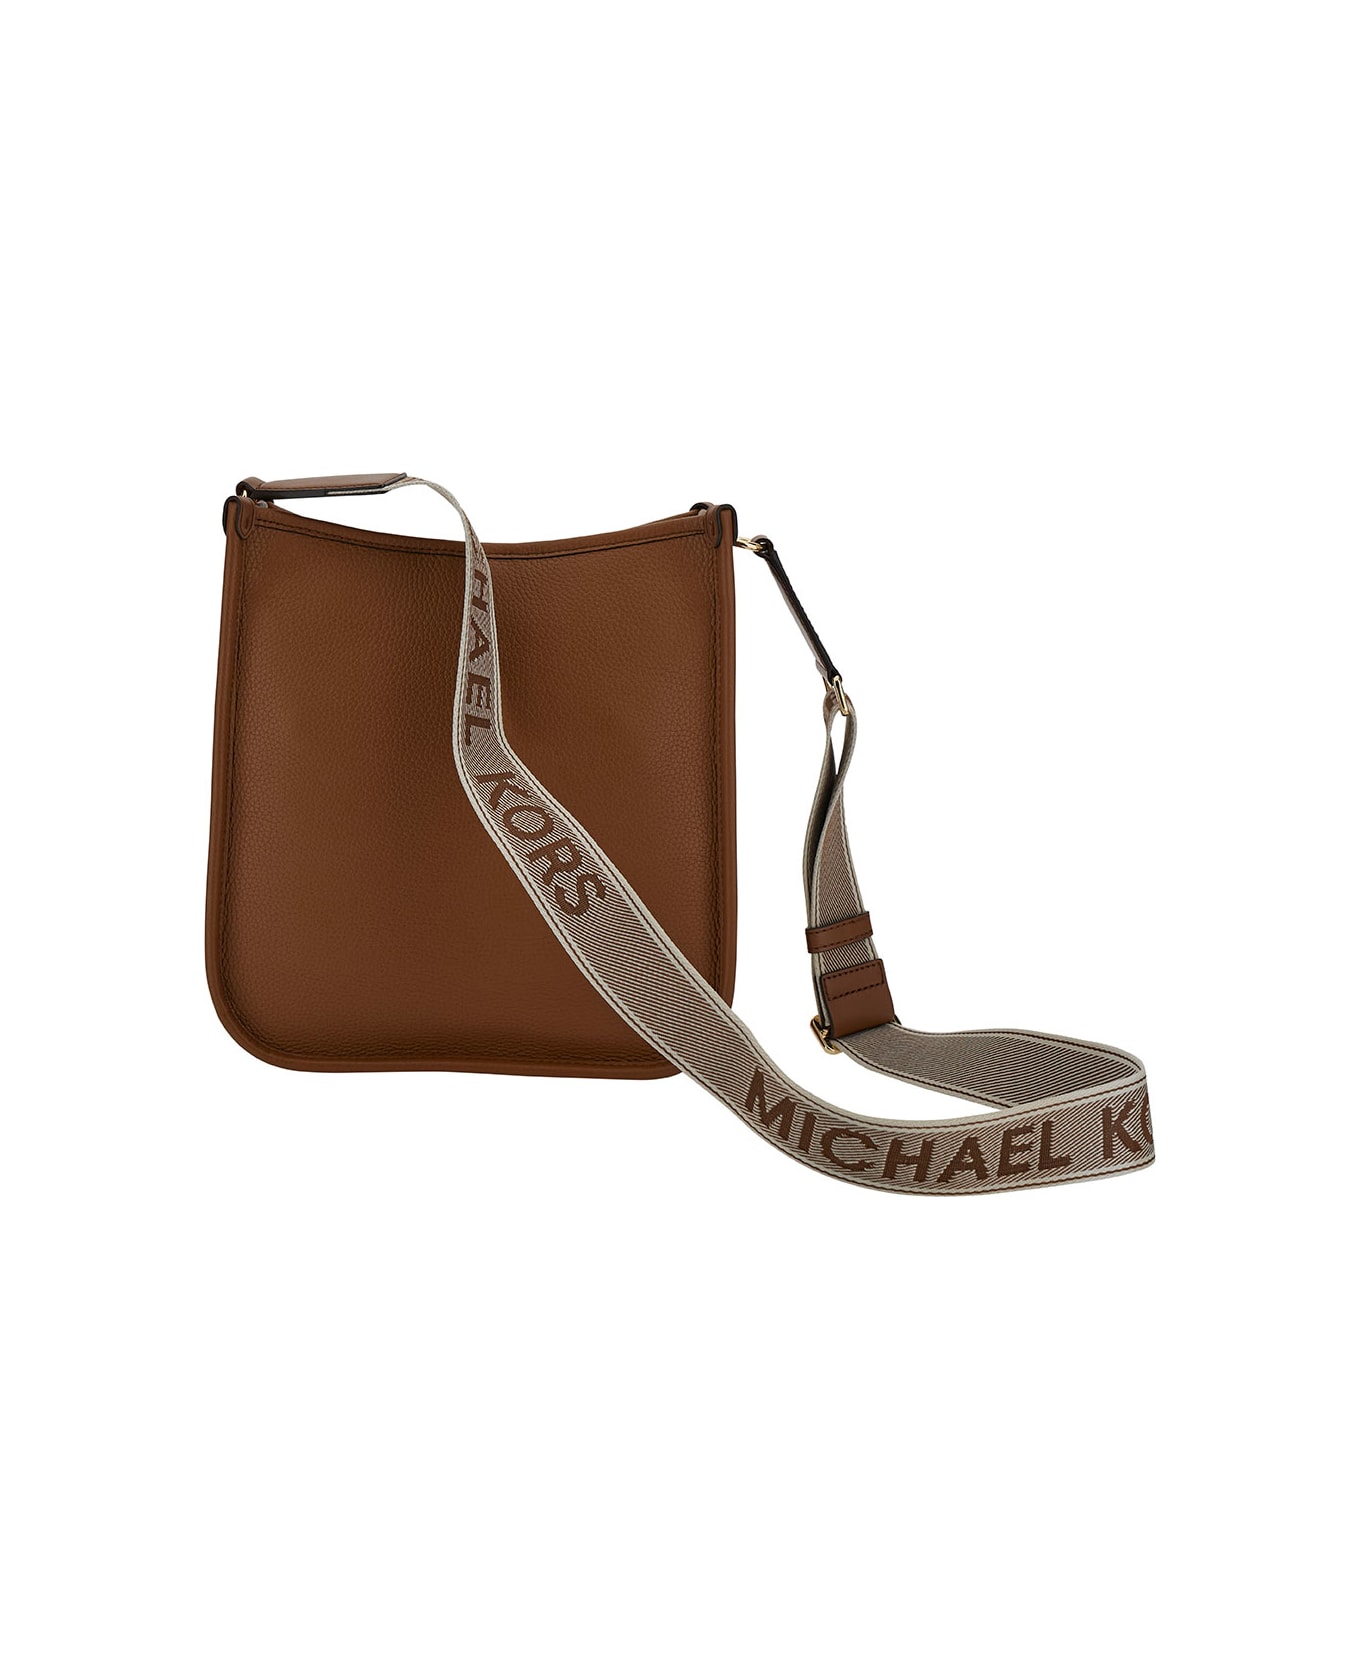 MICHAEL Michael Kors Brown Crossbody Bag With Mk Logo Detail In Hammered Leather Woman - Beige ショルダーバッグ